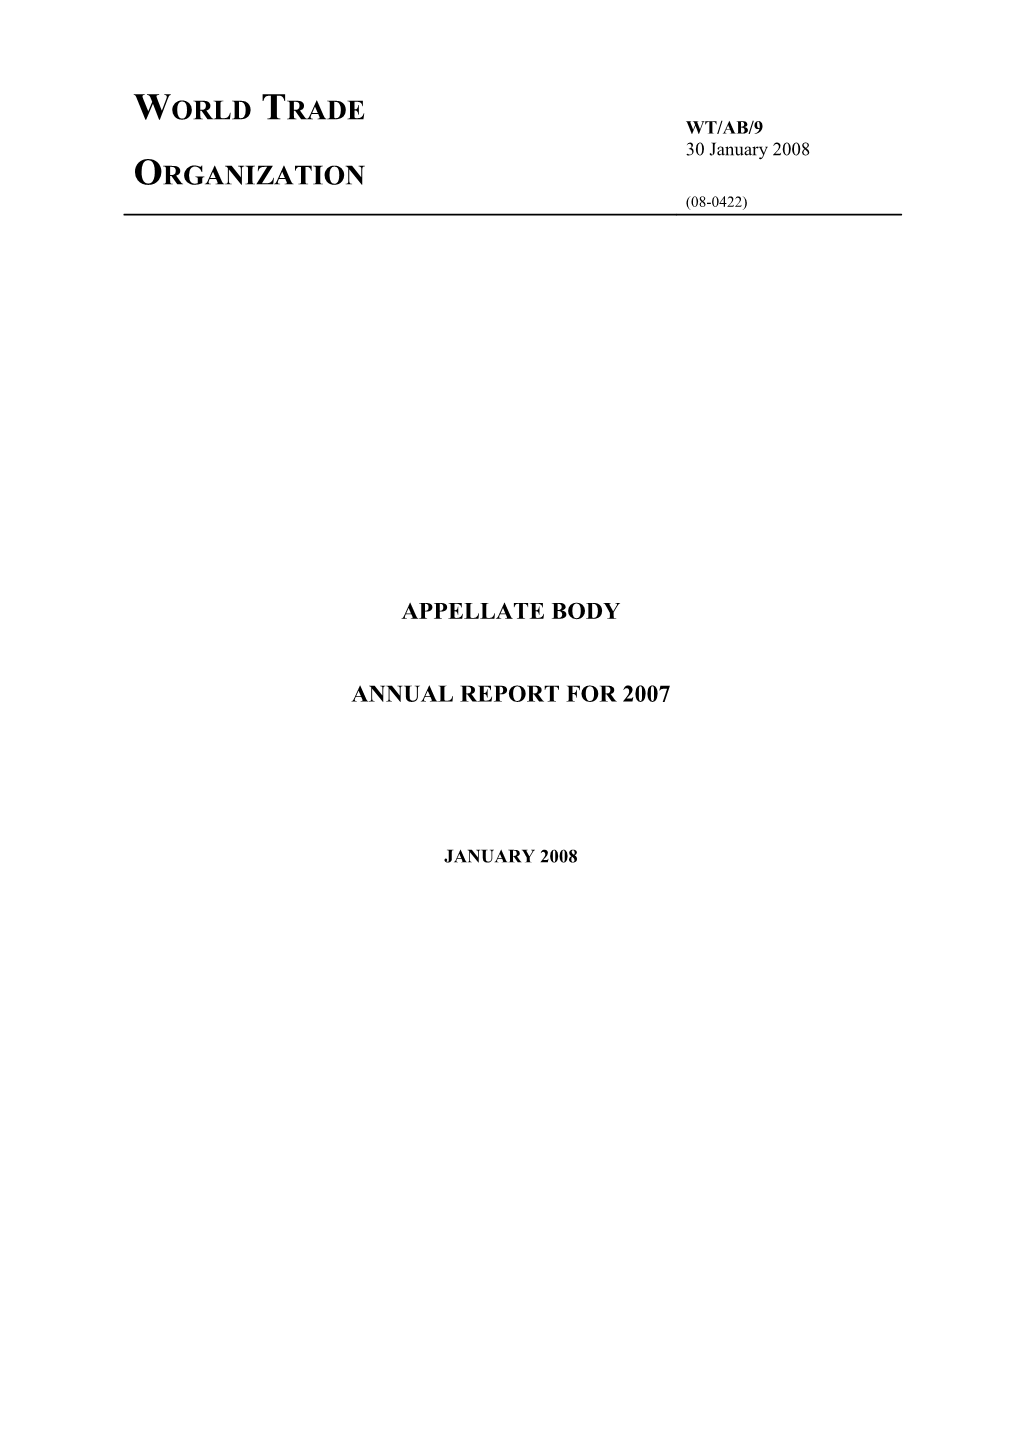 Annual Report for 2007